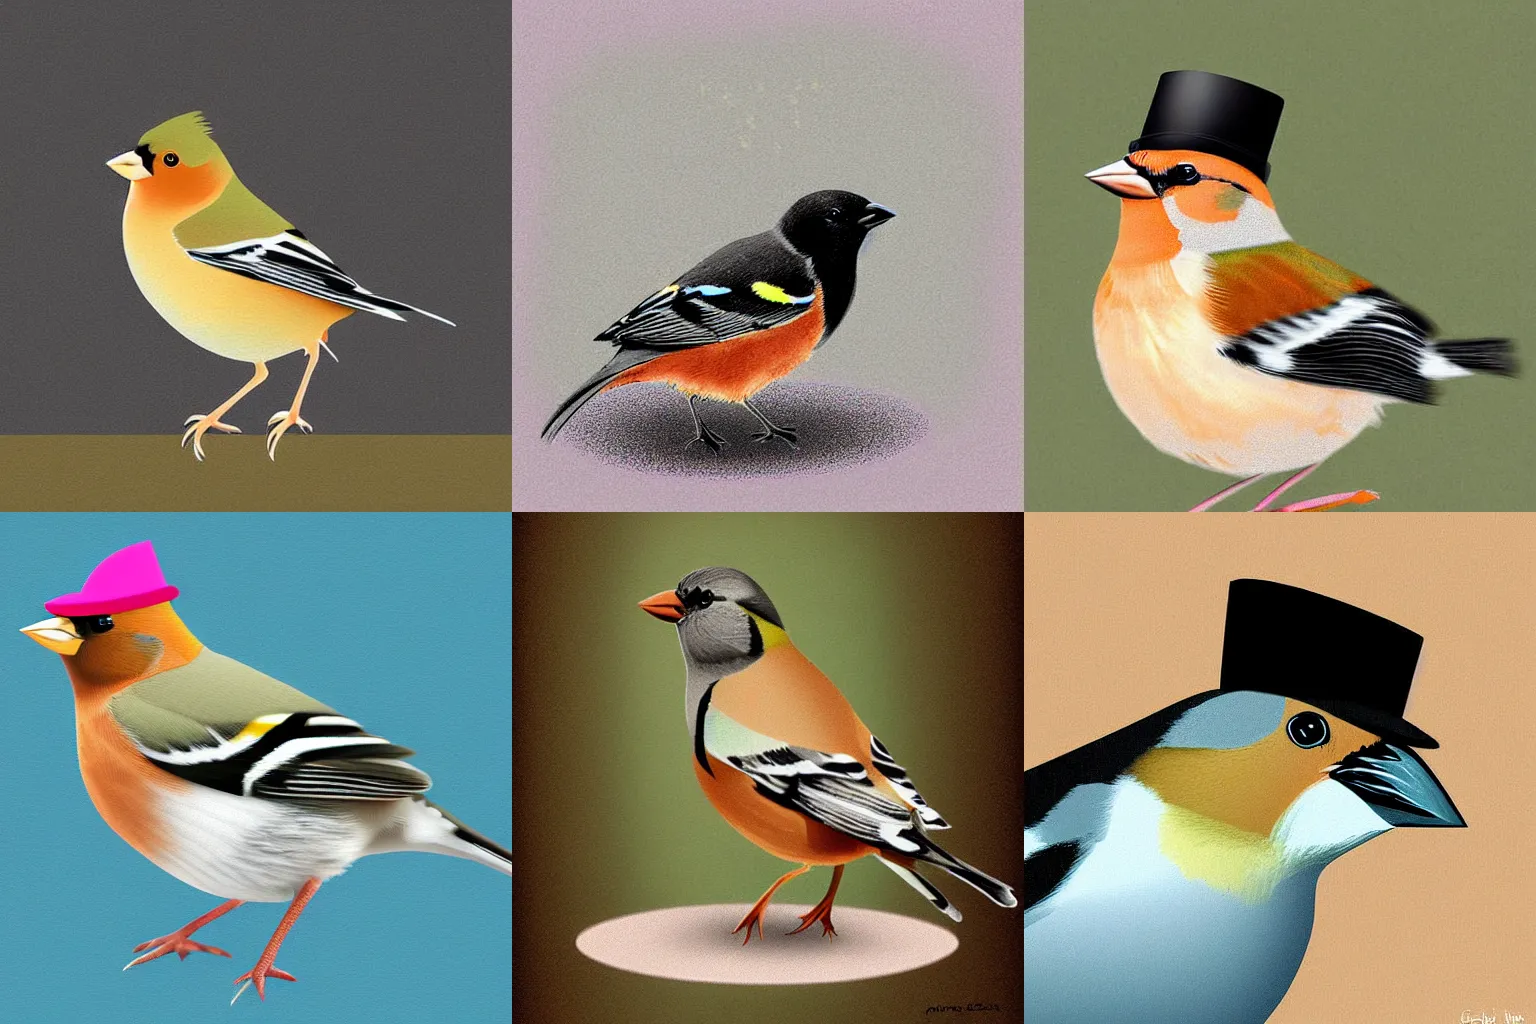 Prompt: A chaffinch wearing a top hat, top hat, digital art